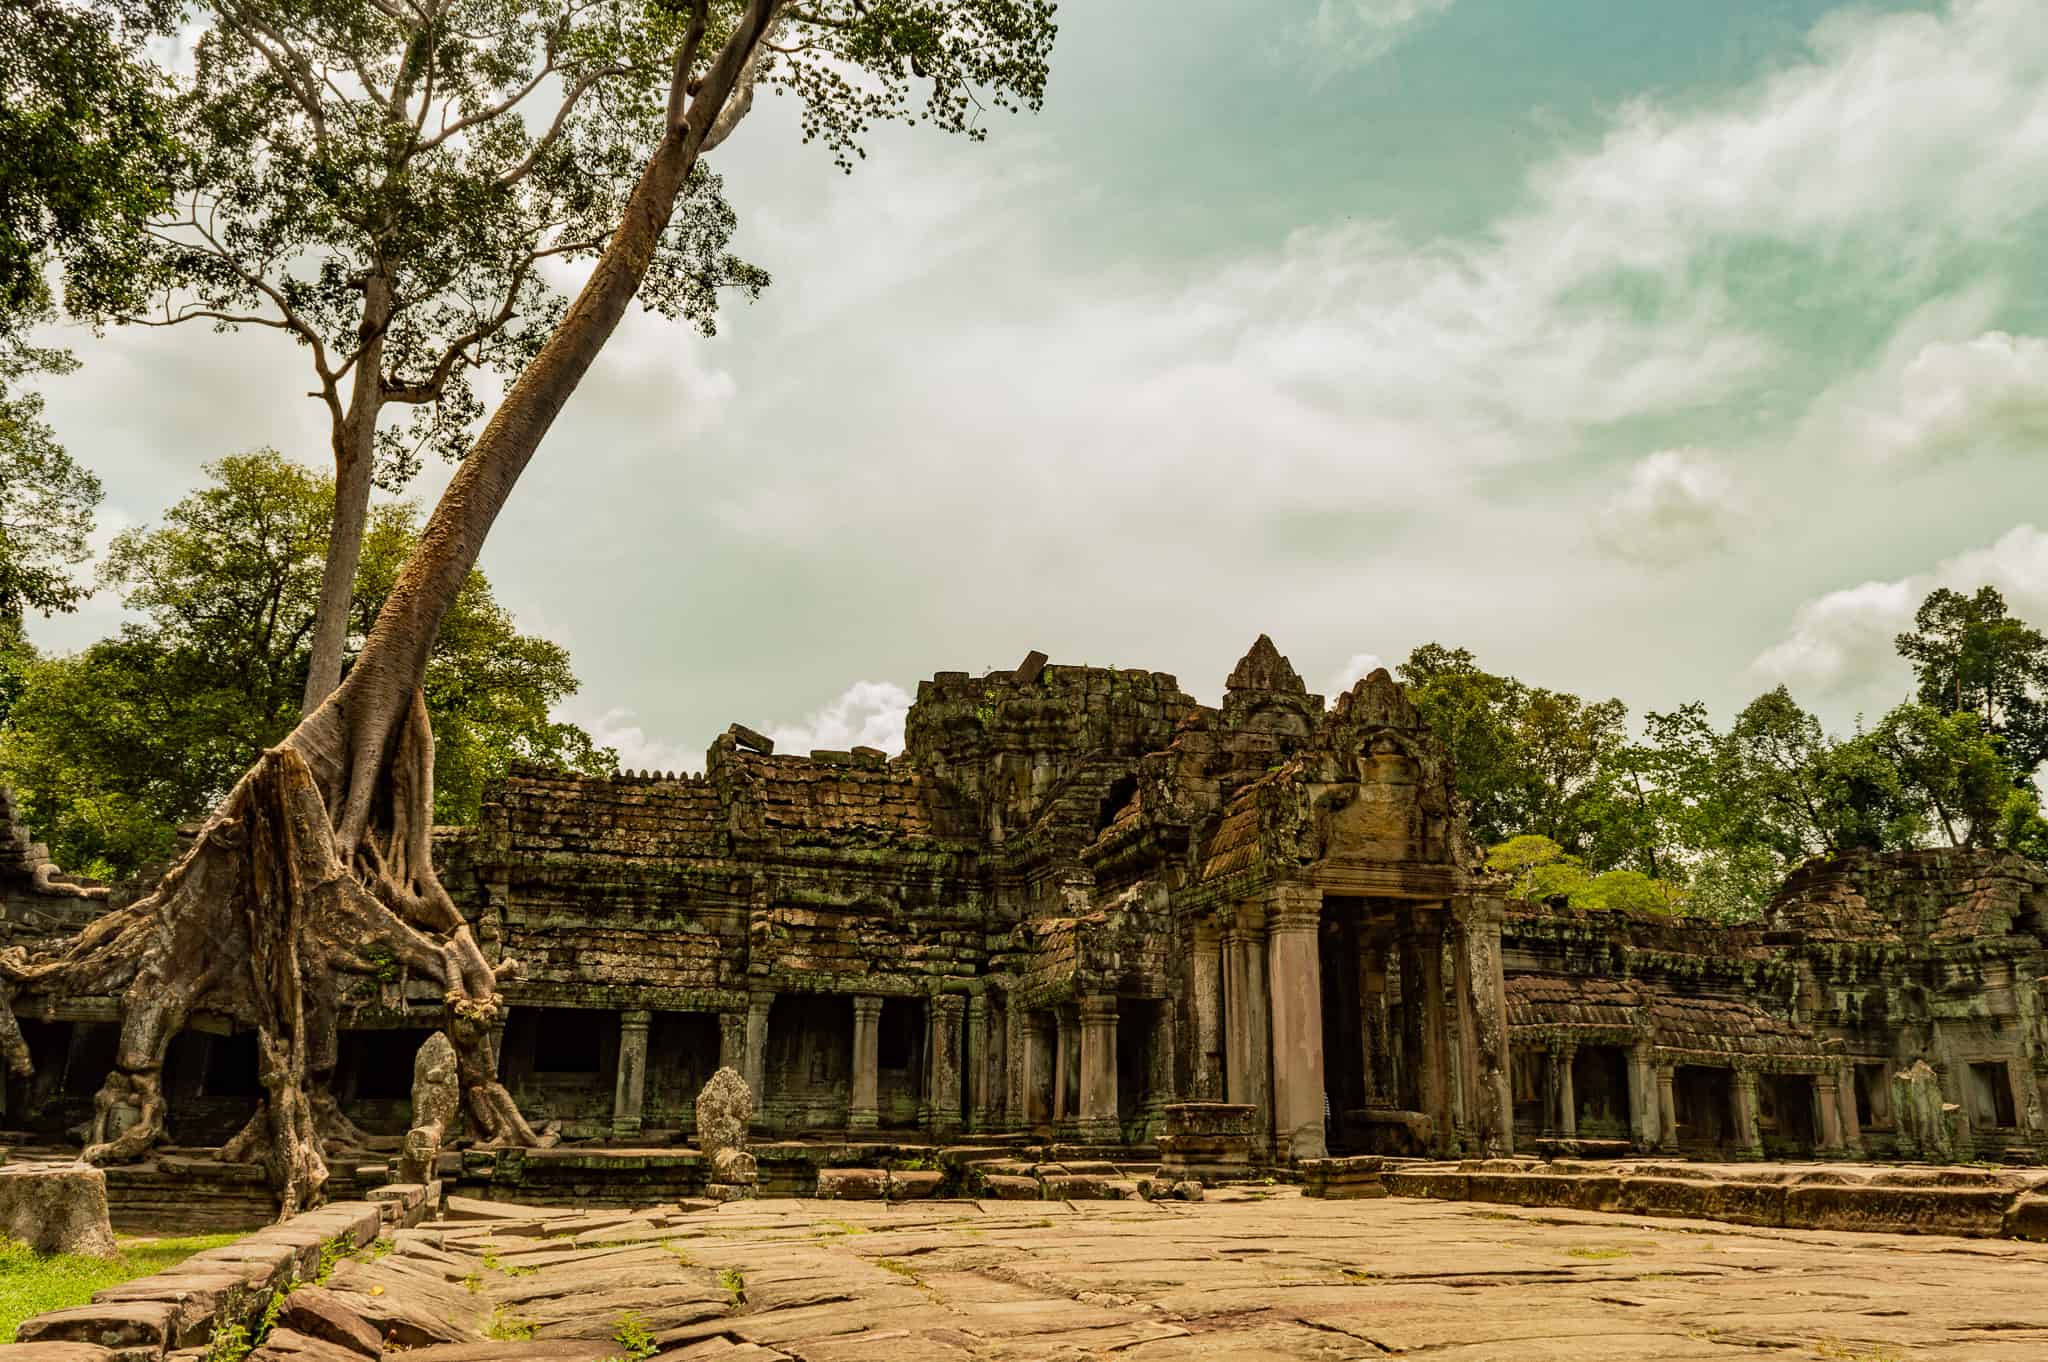 Many smaller, lesser known temple like this are scattered around the complex of Angkor Wat, Siem Reap, Cambodia